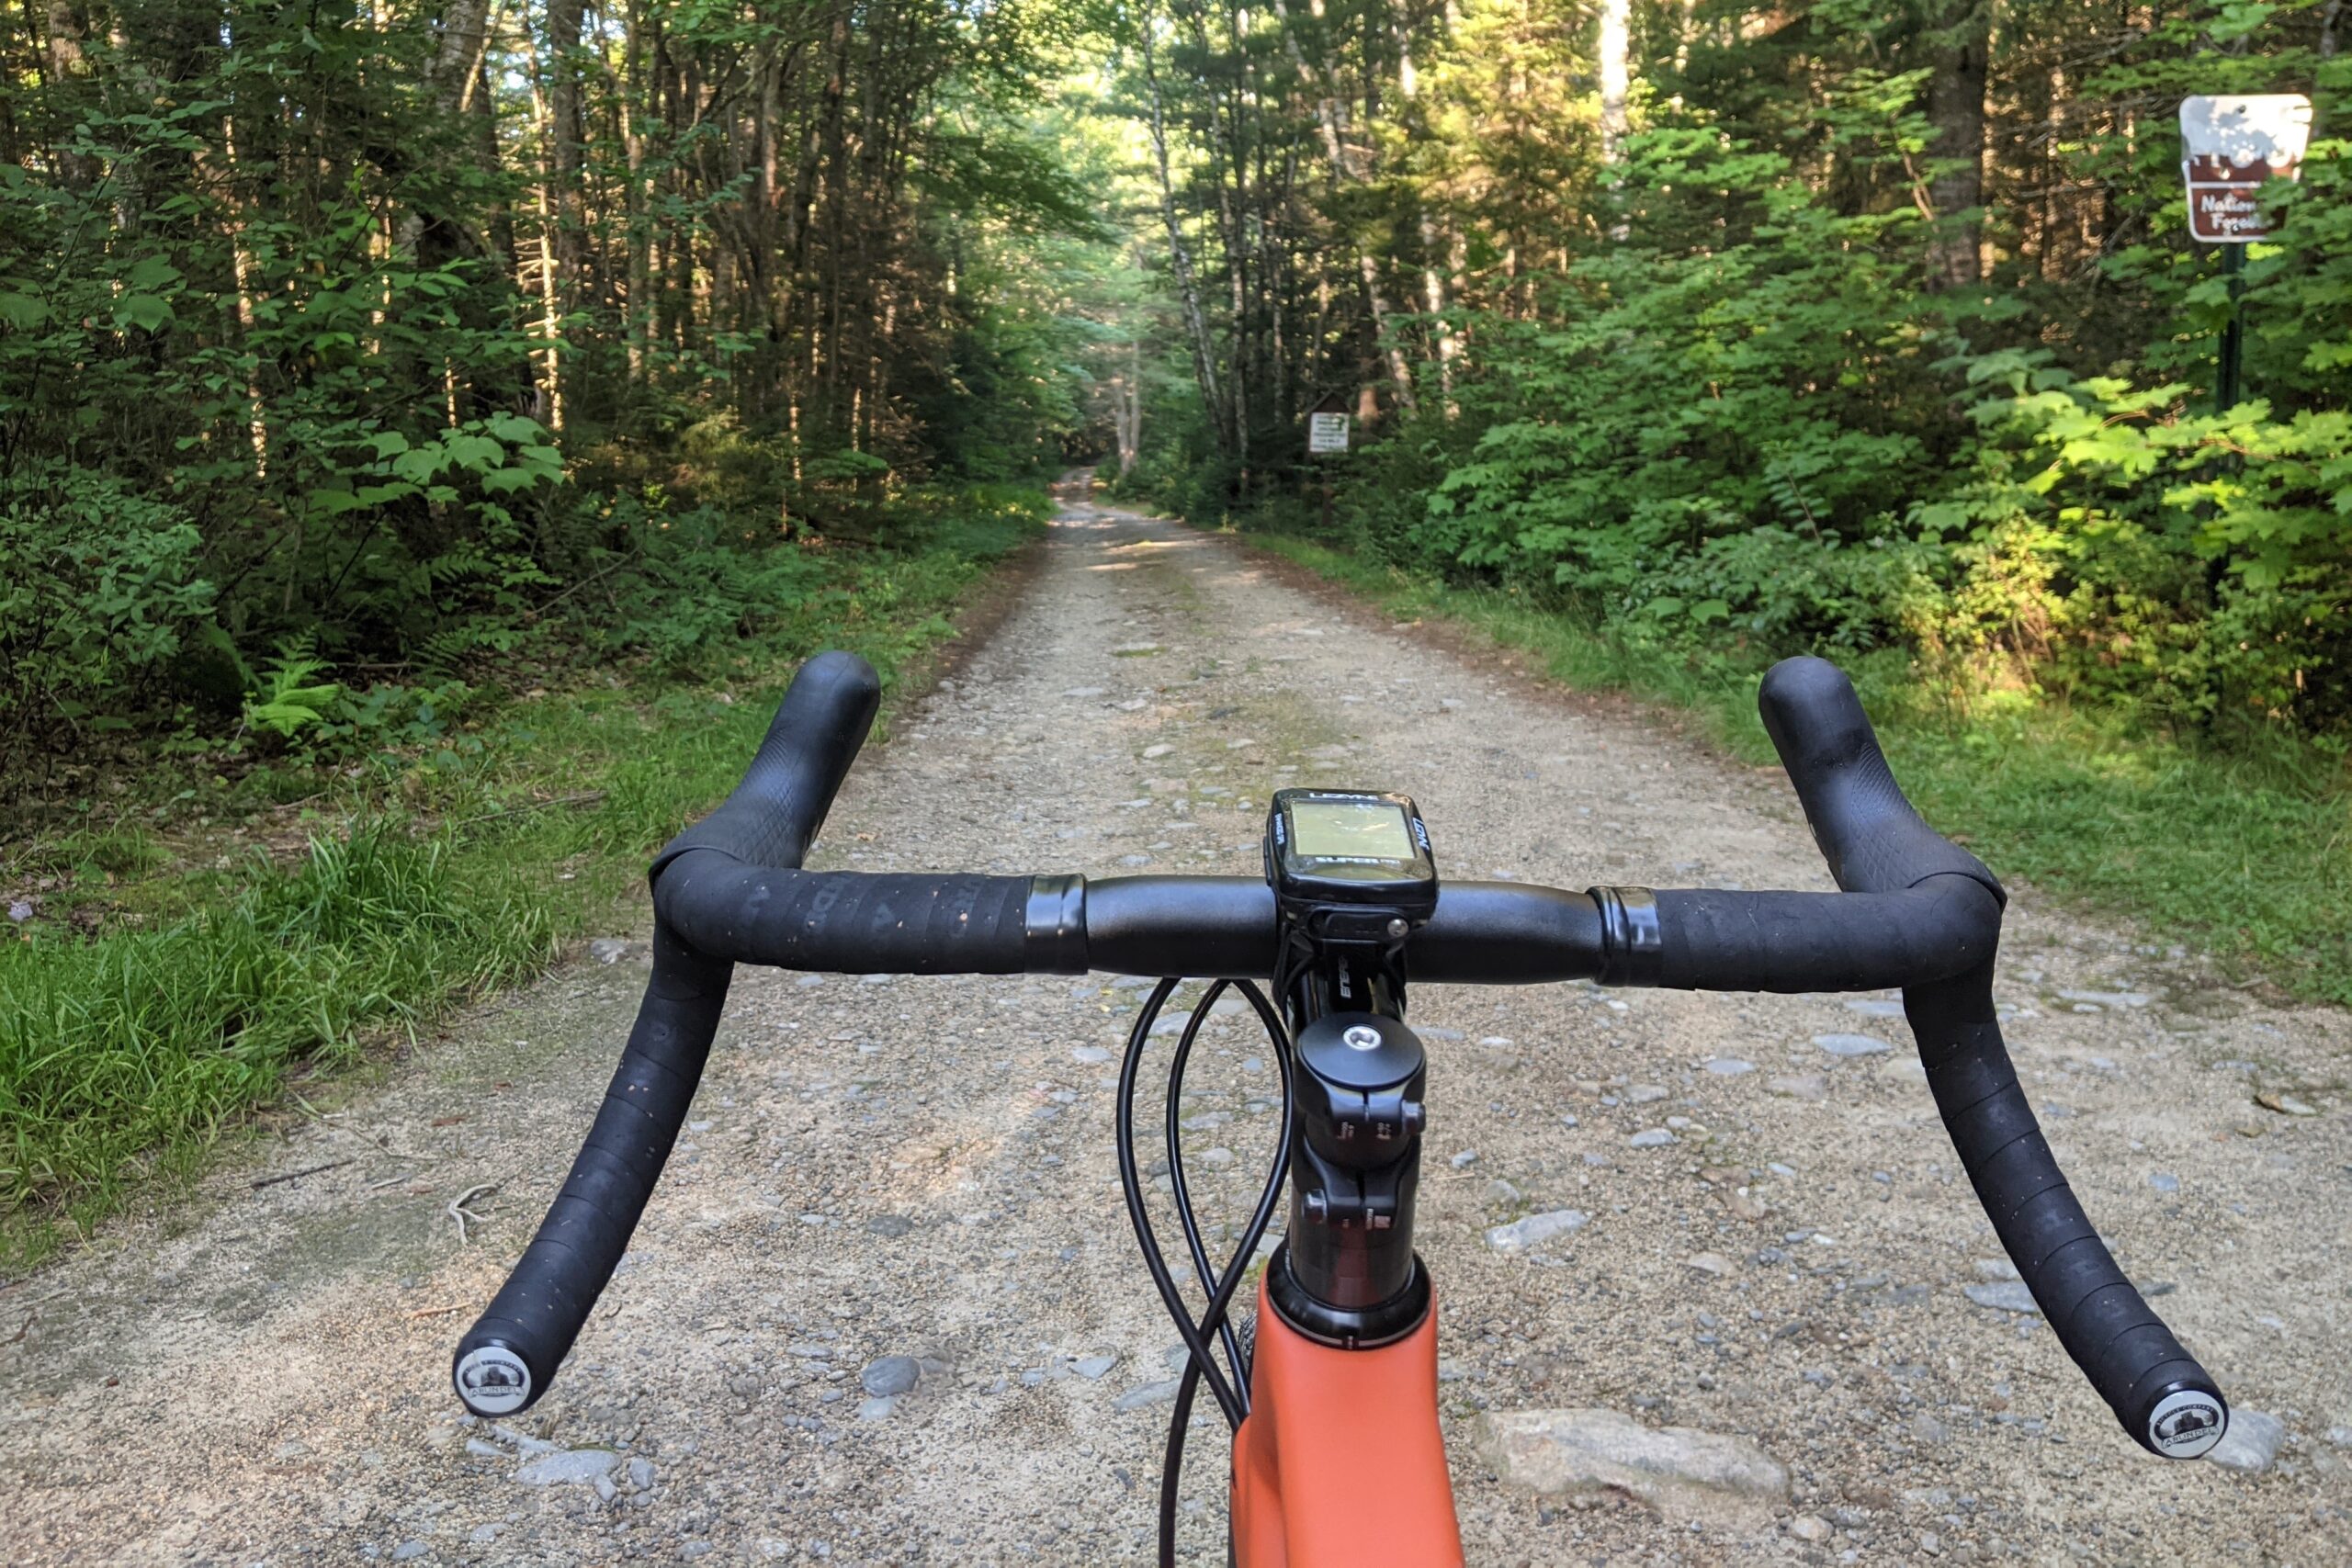 Looking over the handlebars at a gravel road